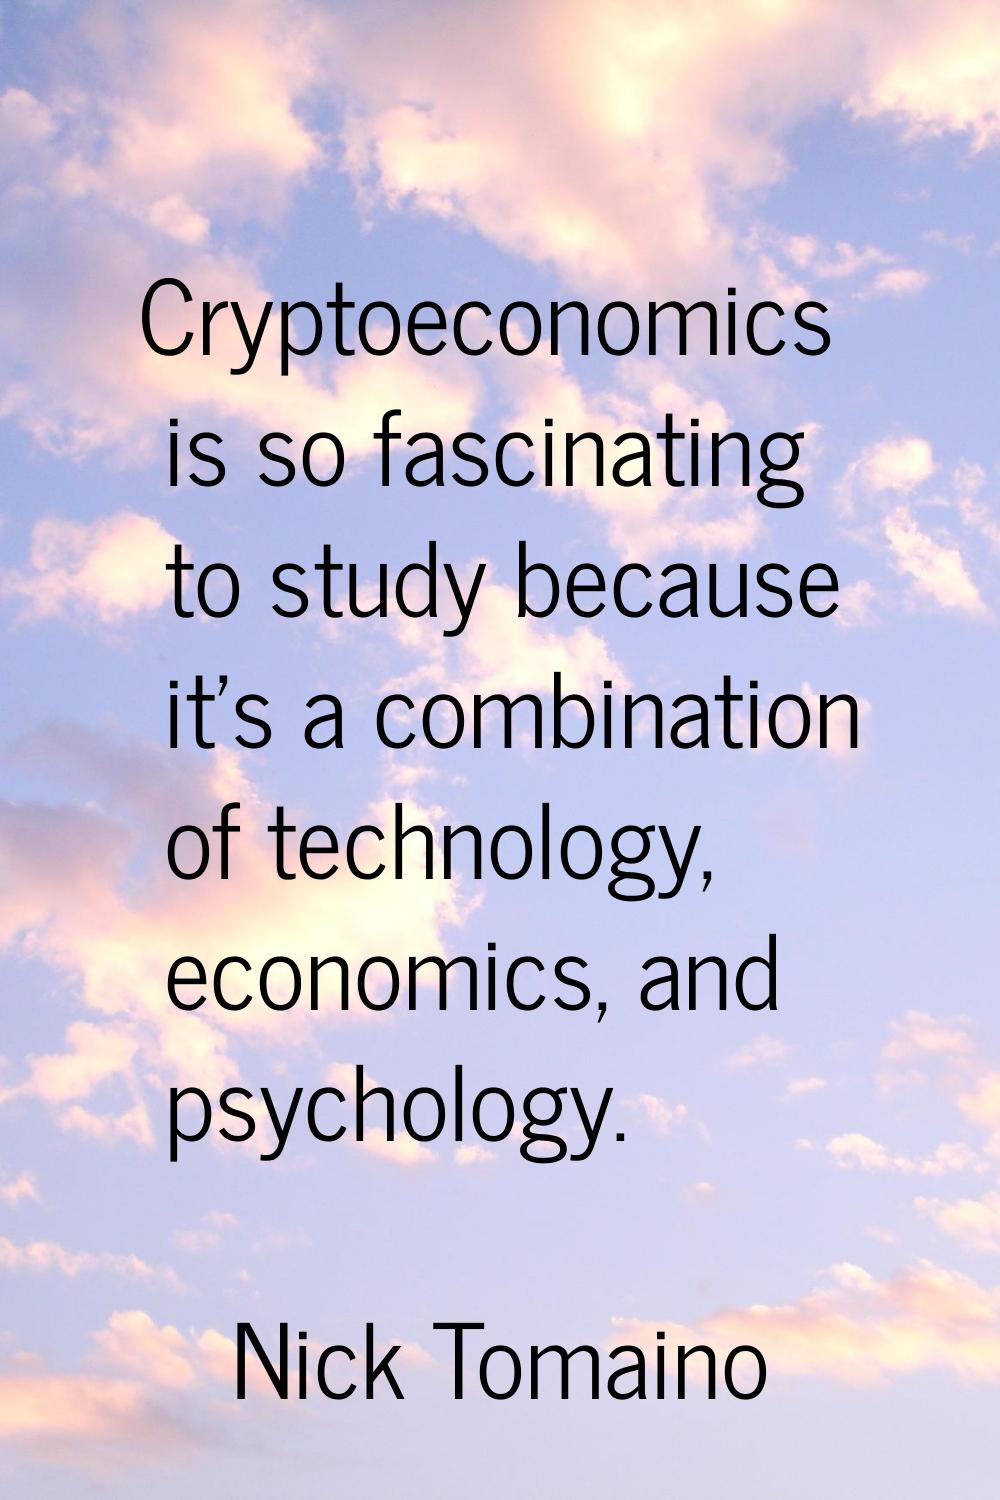 Cryptoeconomics is so fascinating to study because it's a combination of technology, economics, and